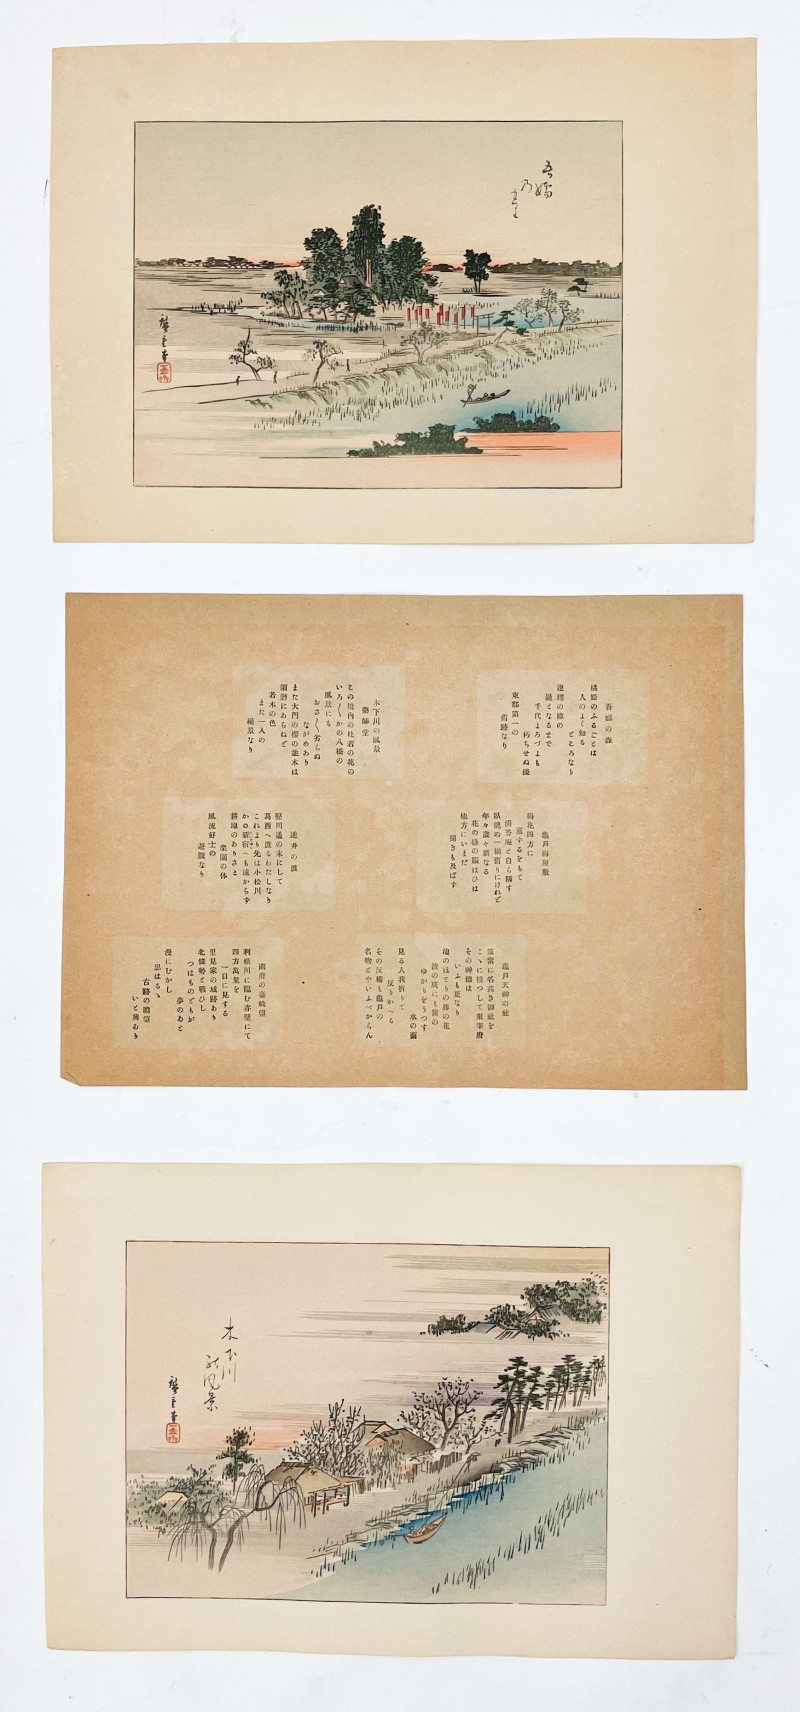 Group of 7 Japanese Landscape Woodblock Prints with Two Poems